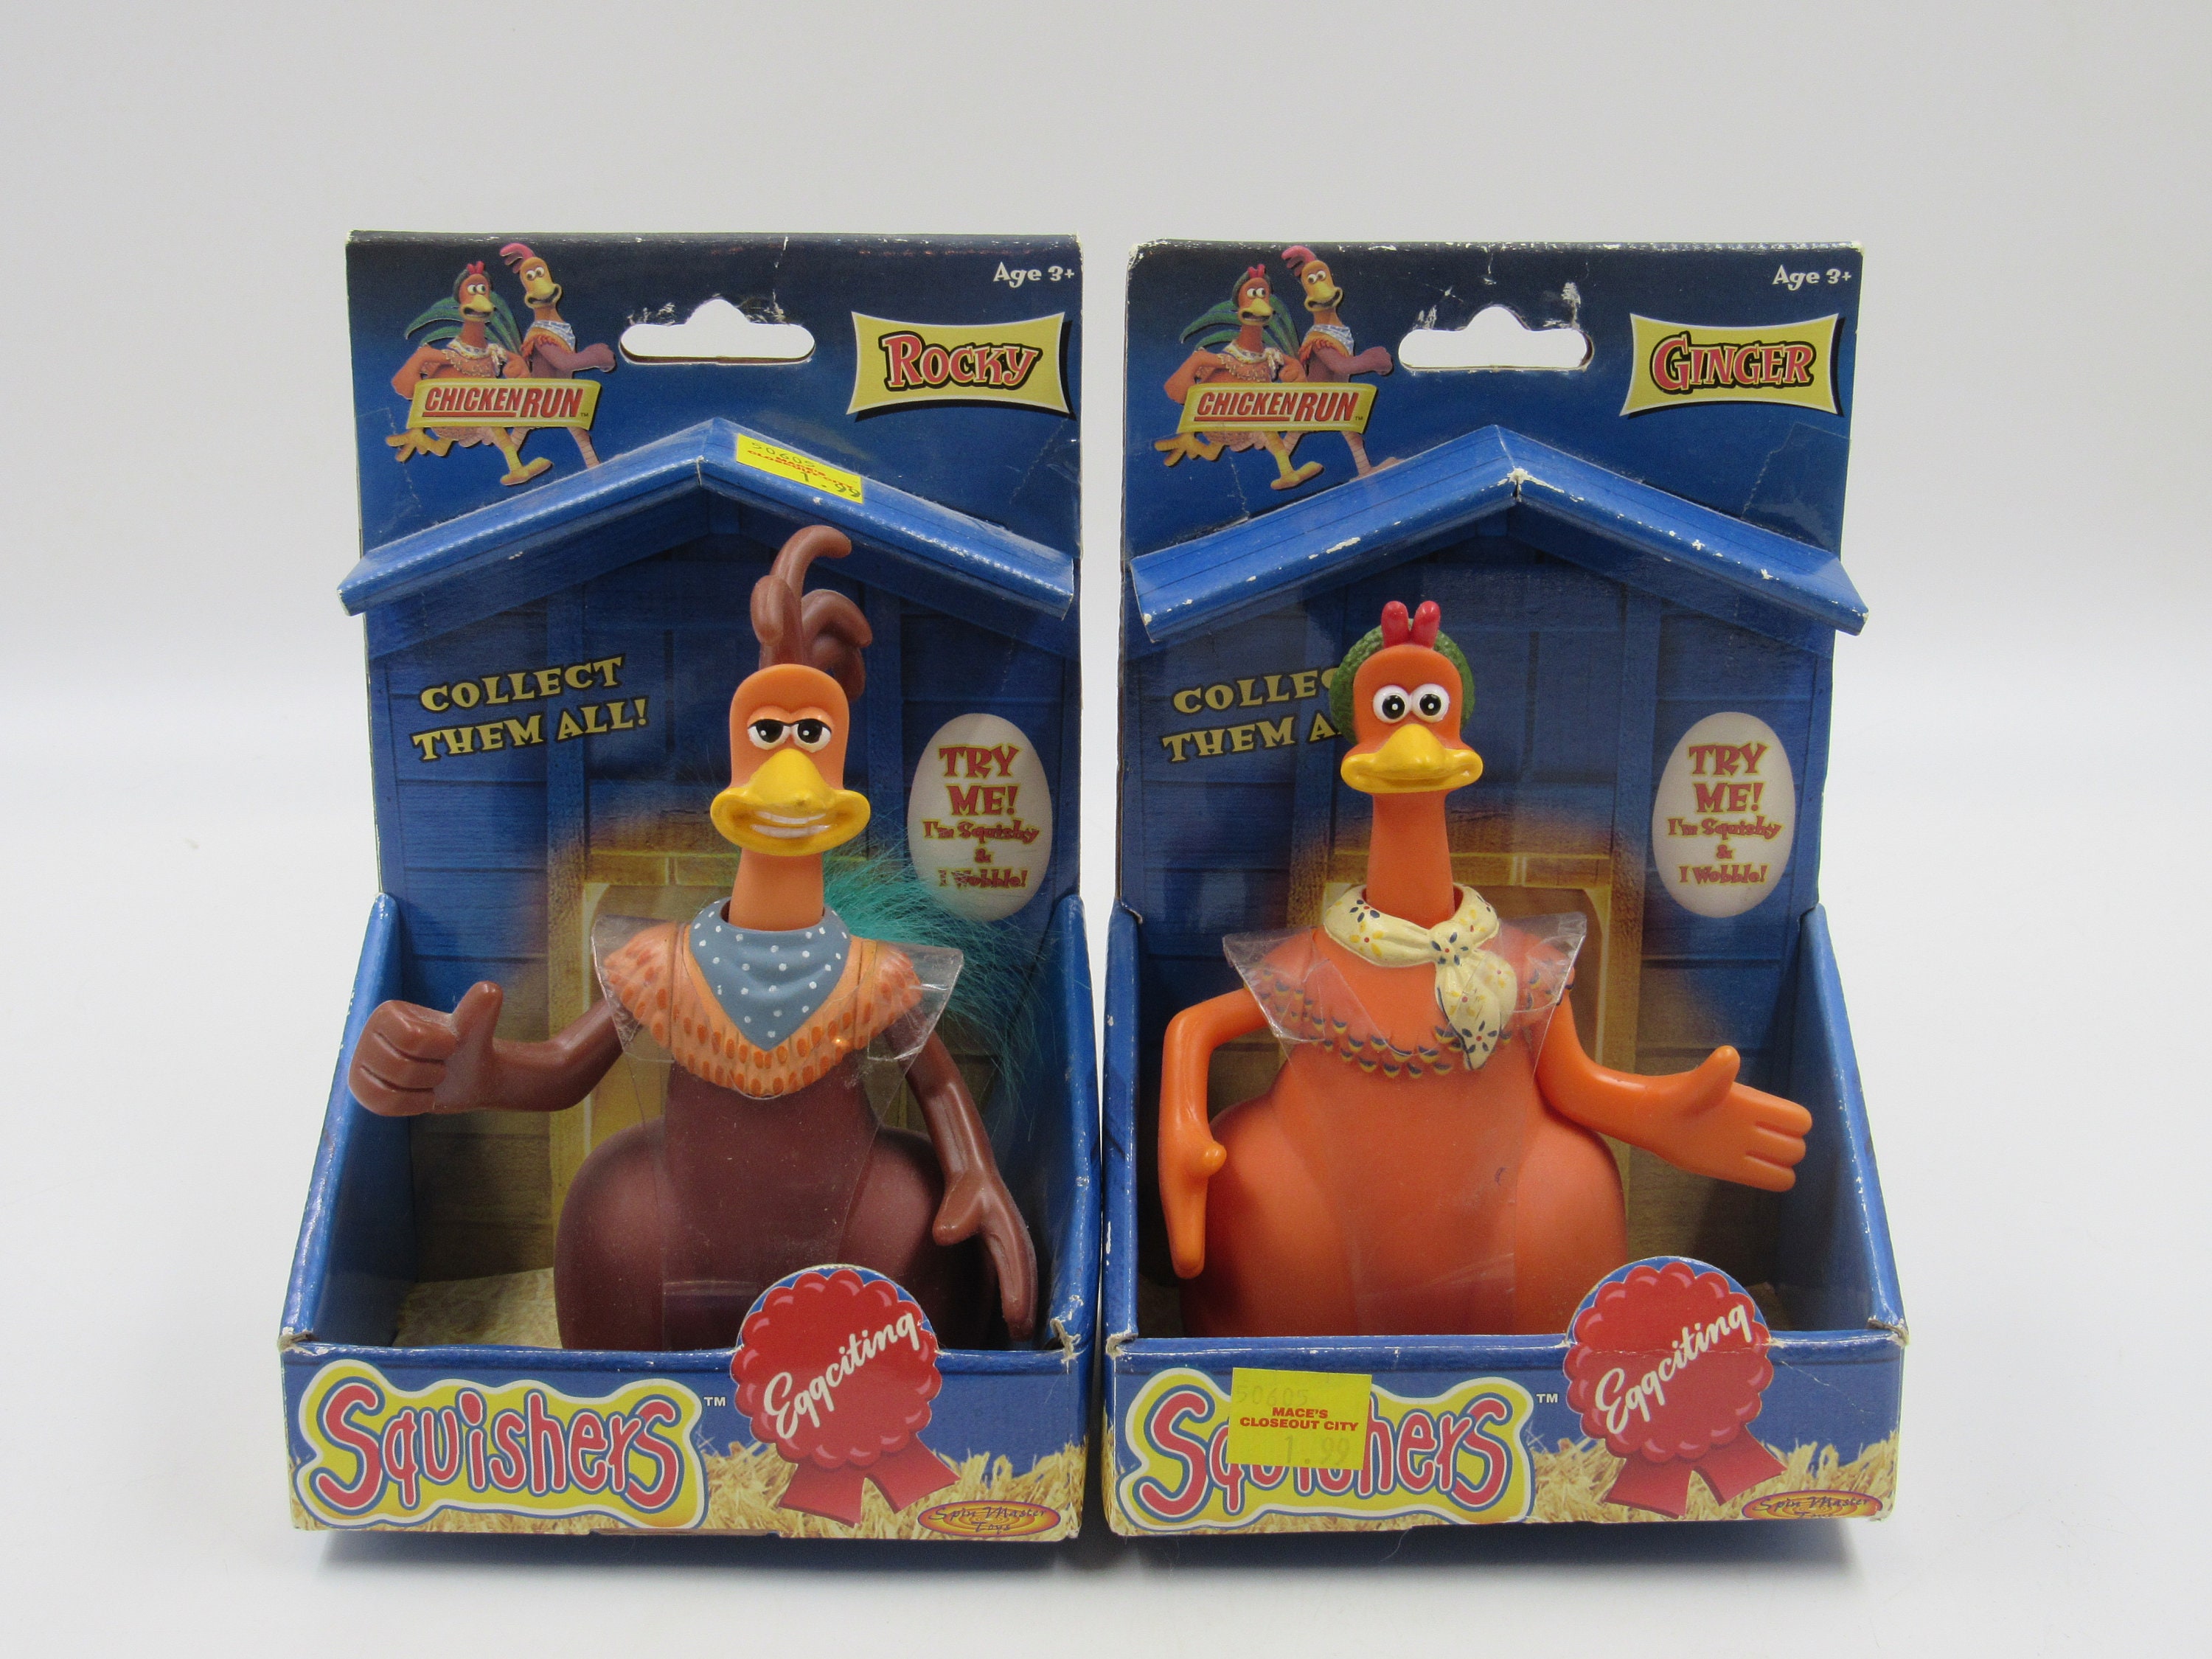 Chicken Run アクションフィギュア Playset Featuring Babs with Yarn Shooting Bellows  and Knitting Ba